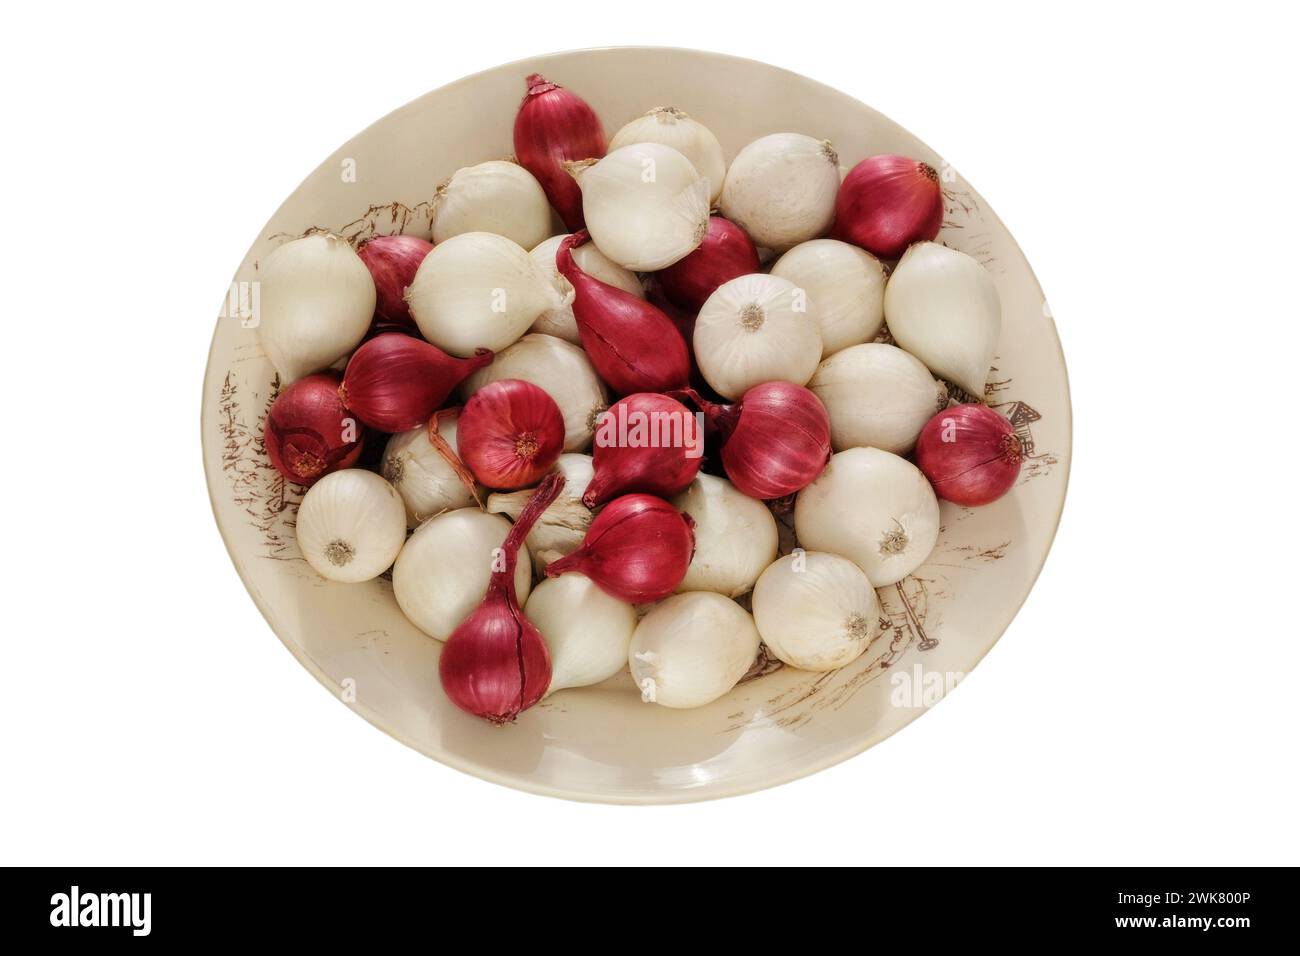 Onion in a ceramic plate isolated on white background. Salad purple and white onion in village bowl. Harvest. Stock Photo